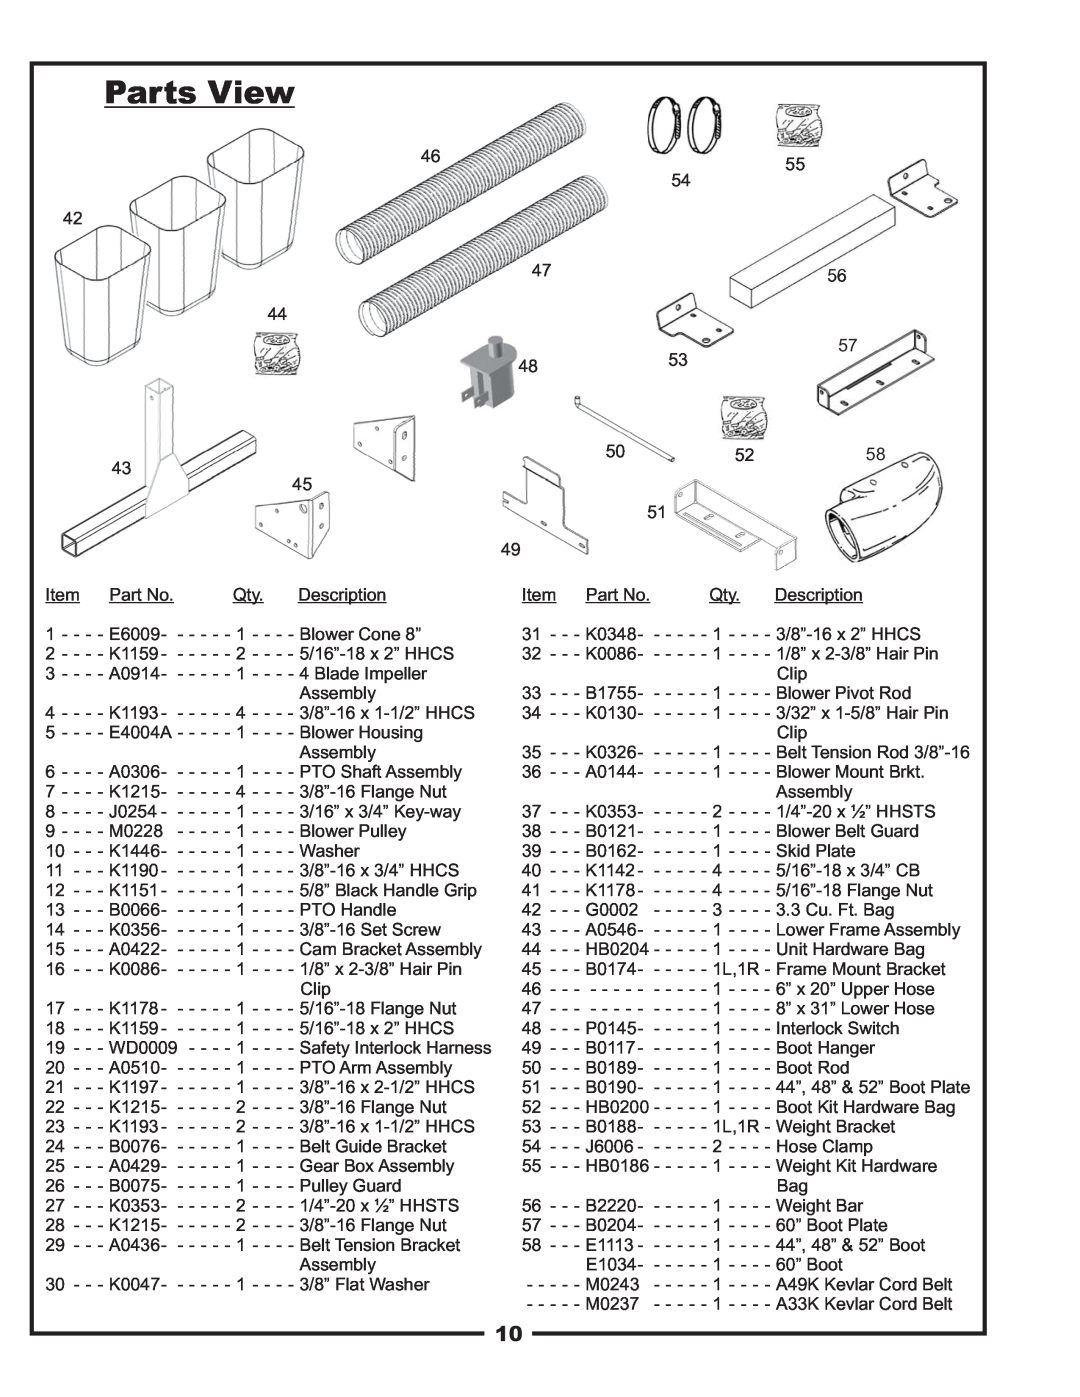 Gravely 12031301, 12031302 manual Parts View 